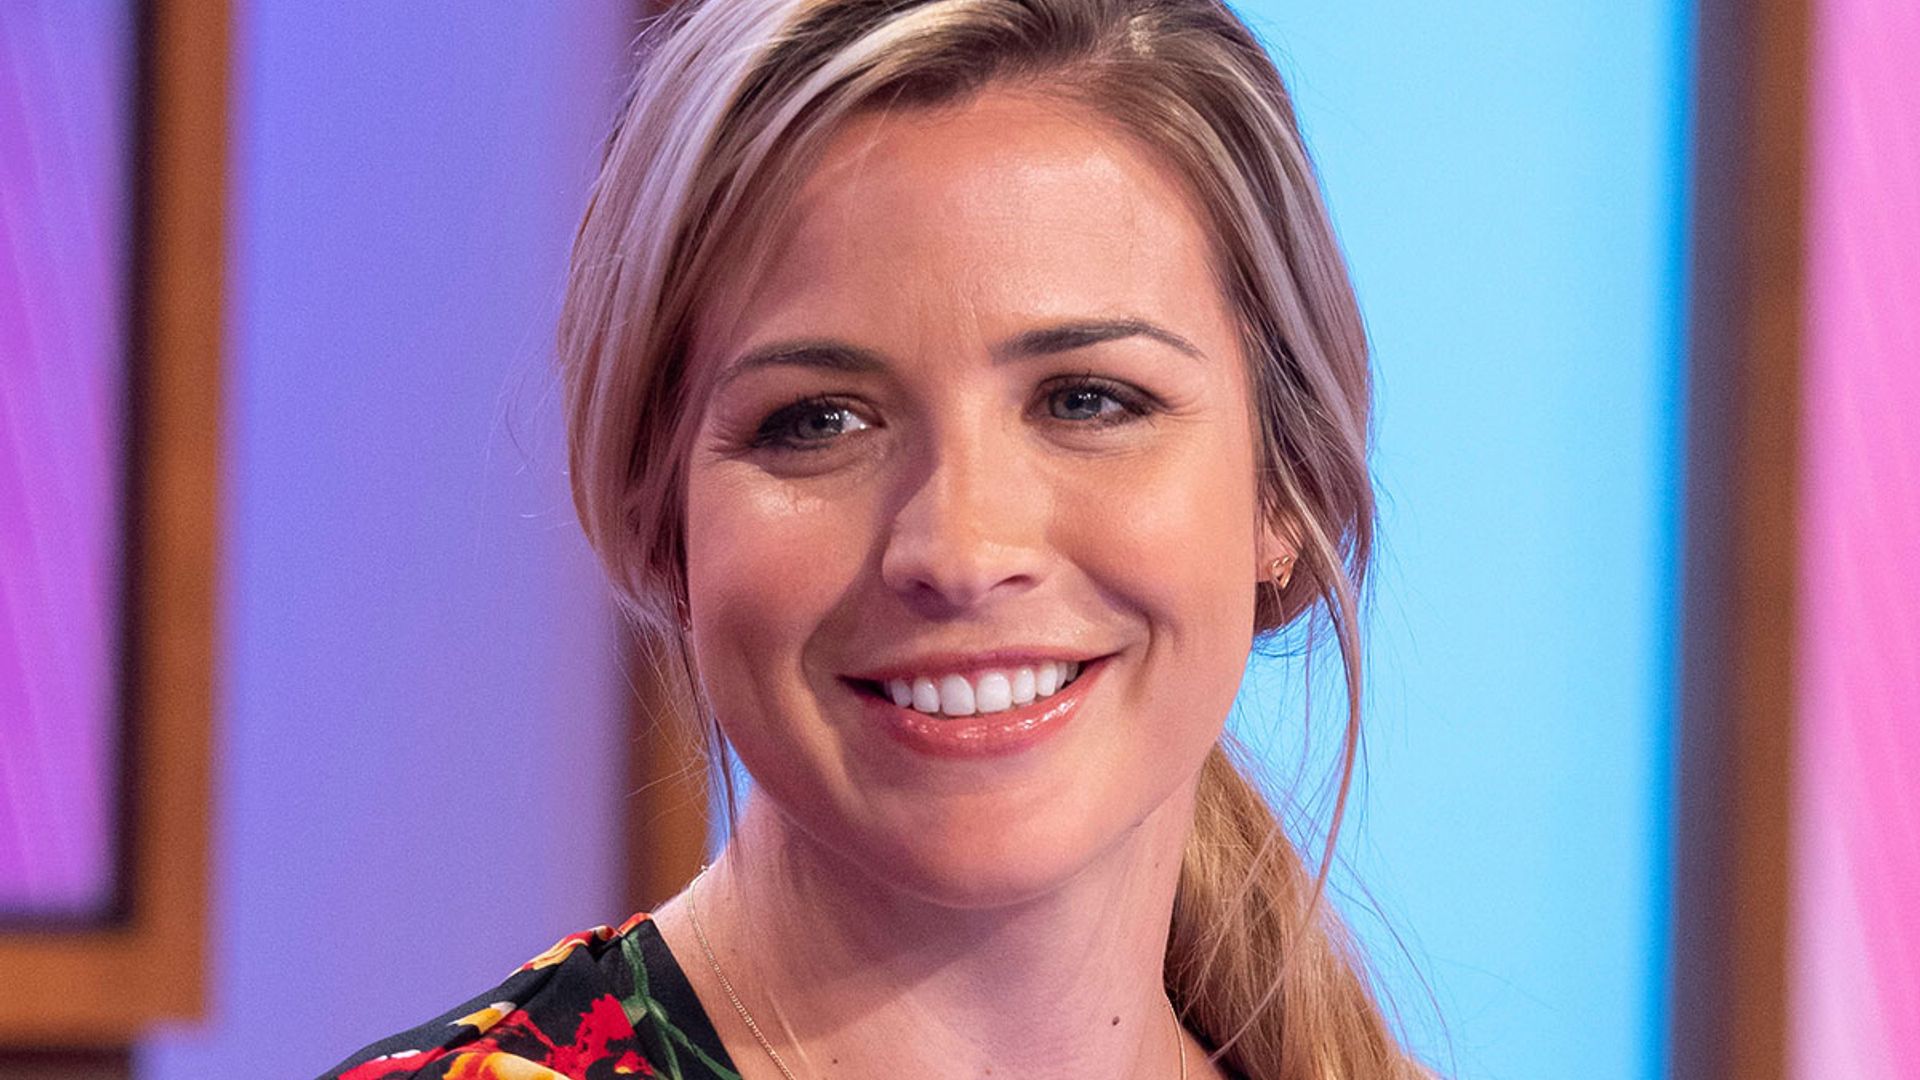 Gemma Atkinson's embarrassing tattoo regret leaves fans with questions